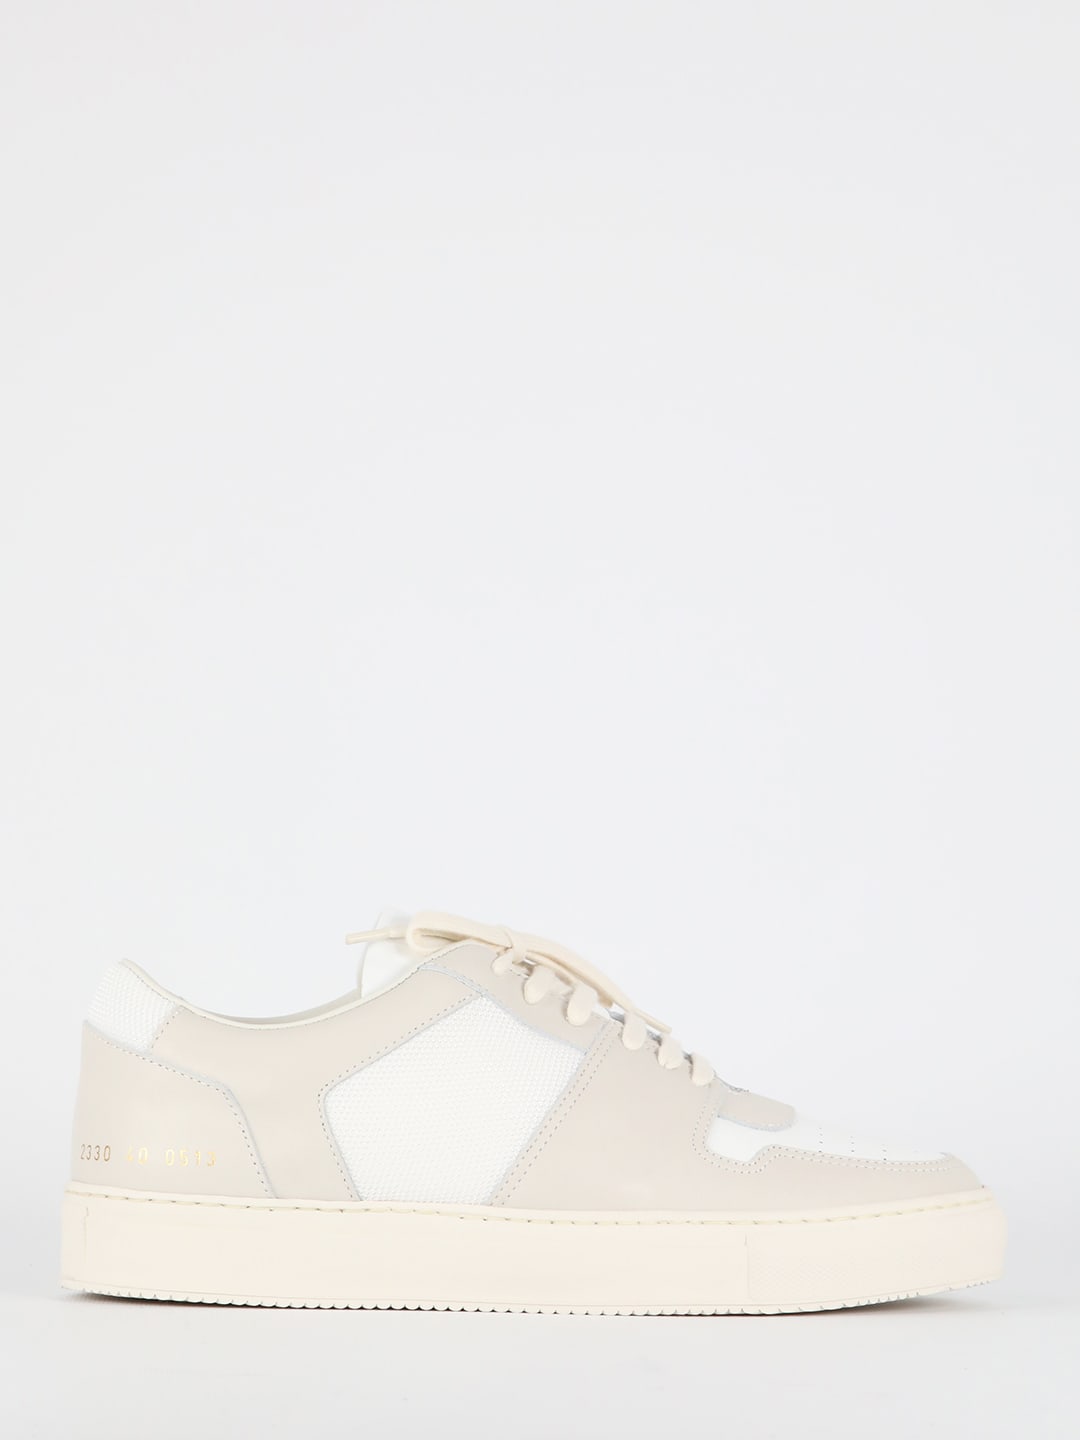 Common Projects Decades Low Sneakers